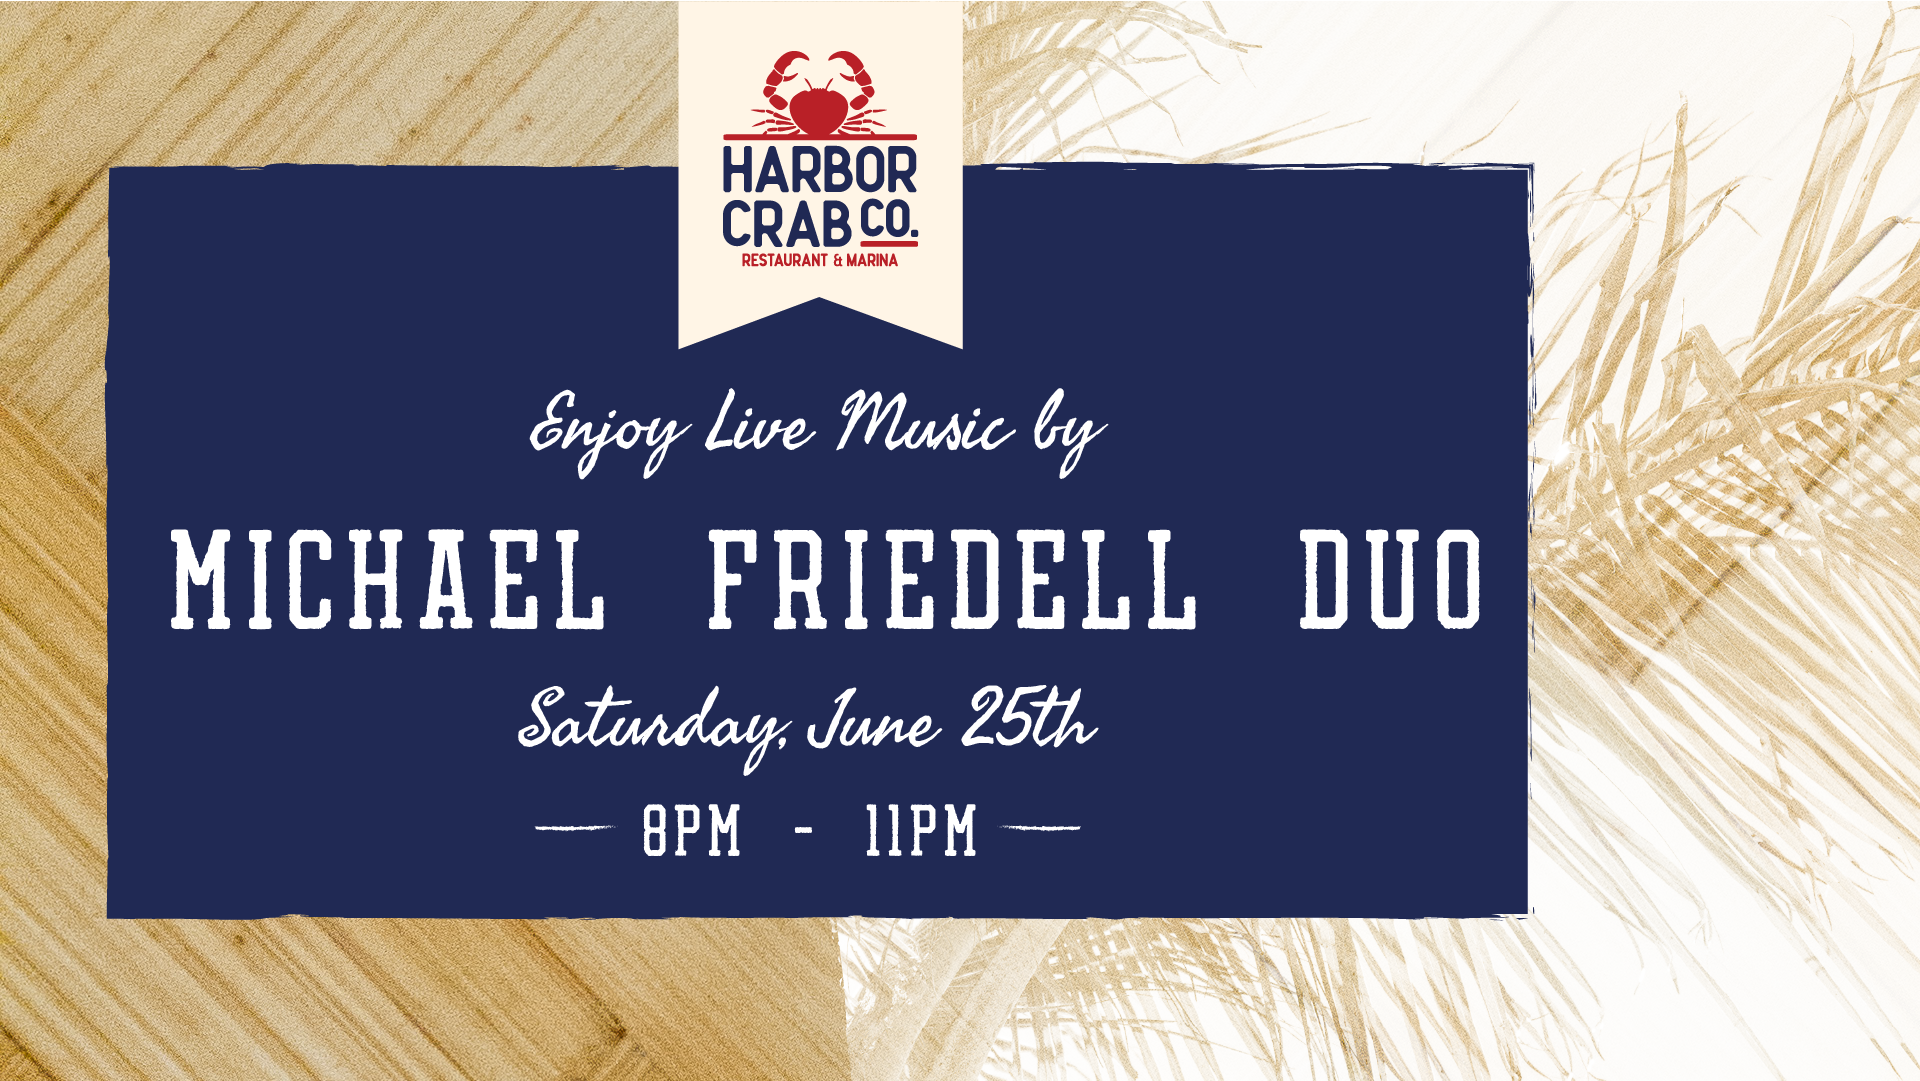 Flyer for Michael Friedell Duo on June 25th at 8pm